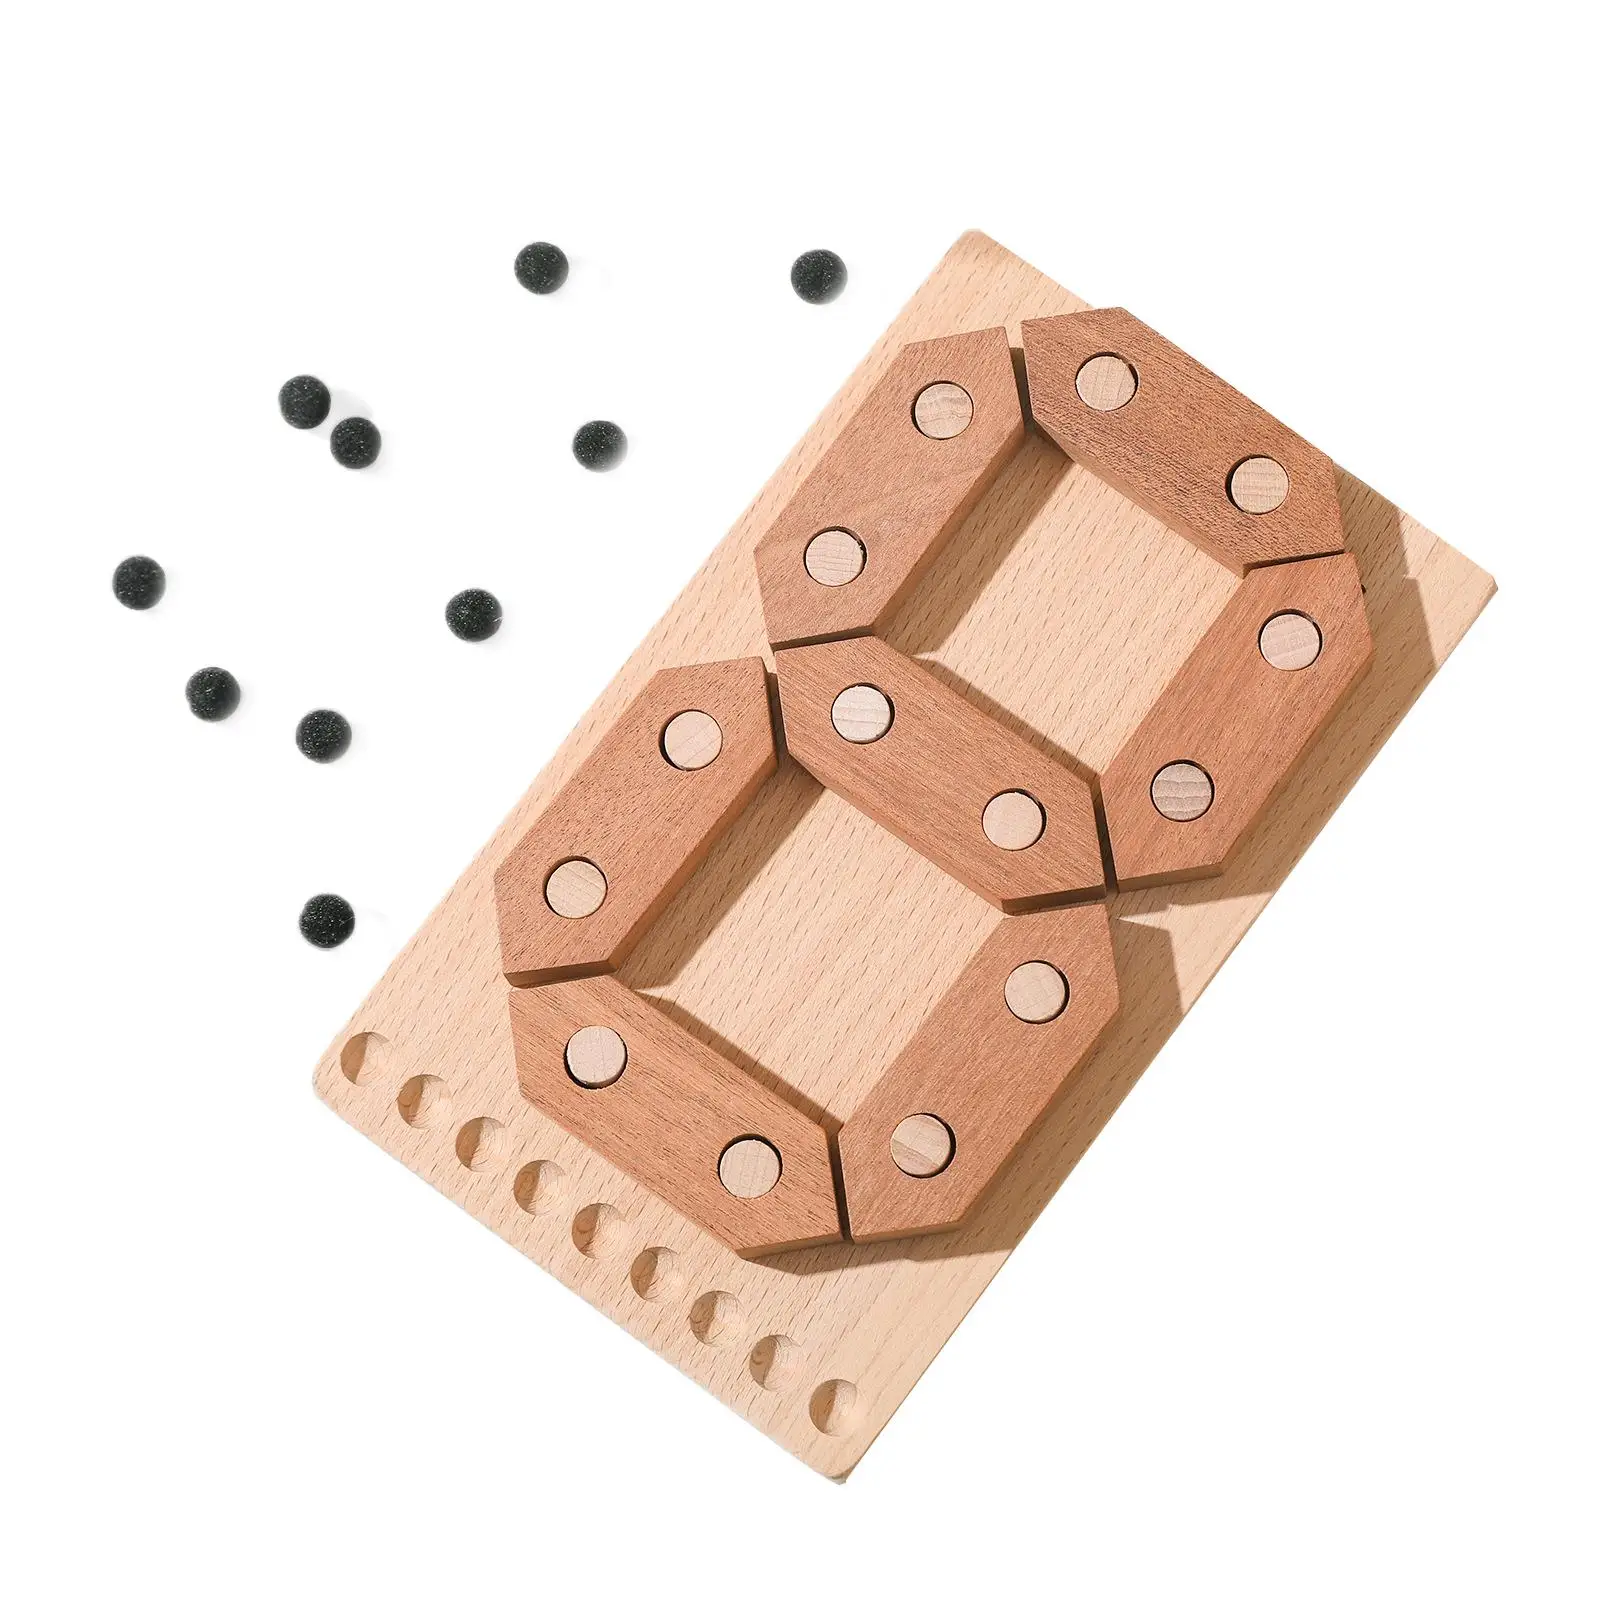 Montessori Wooden Puzzle Sensory Toy Math Number Shape Match Educational Toy 3D Jigsaw Puzzle for Party Favors Children Kids